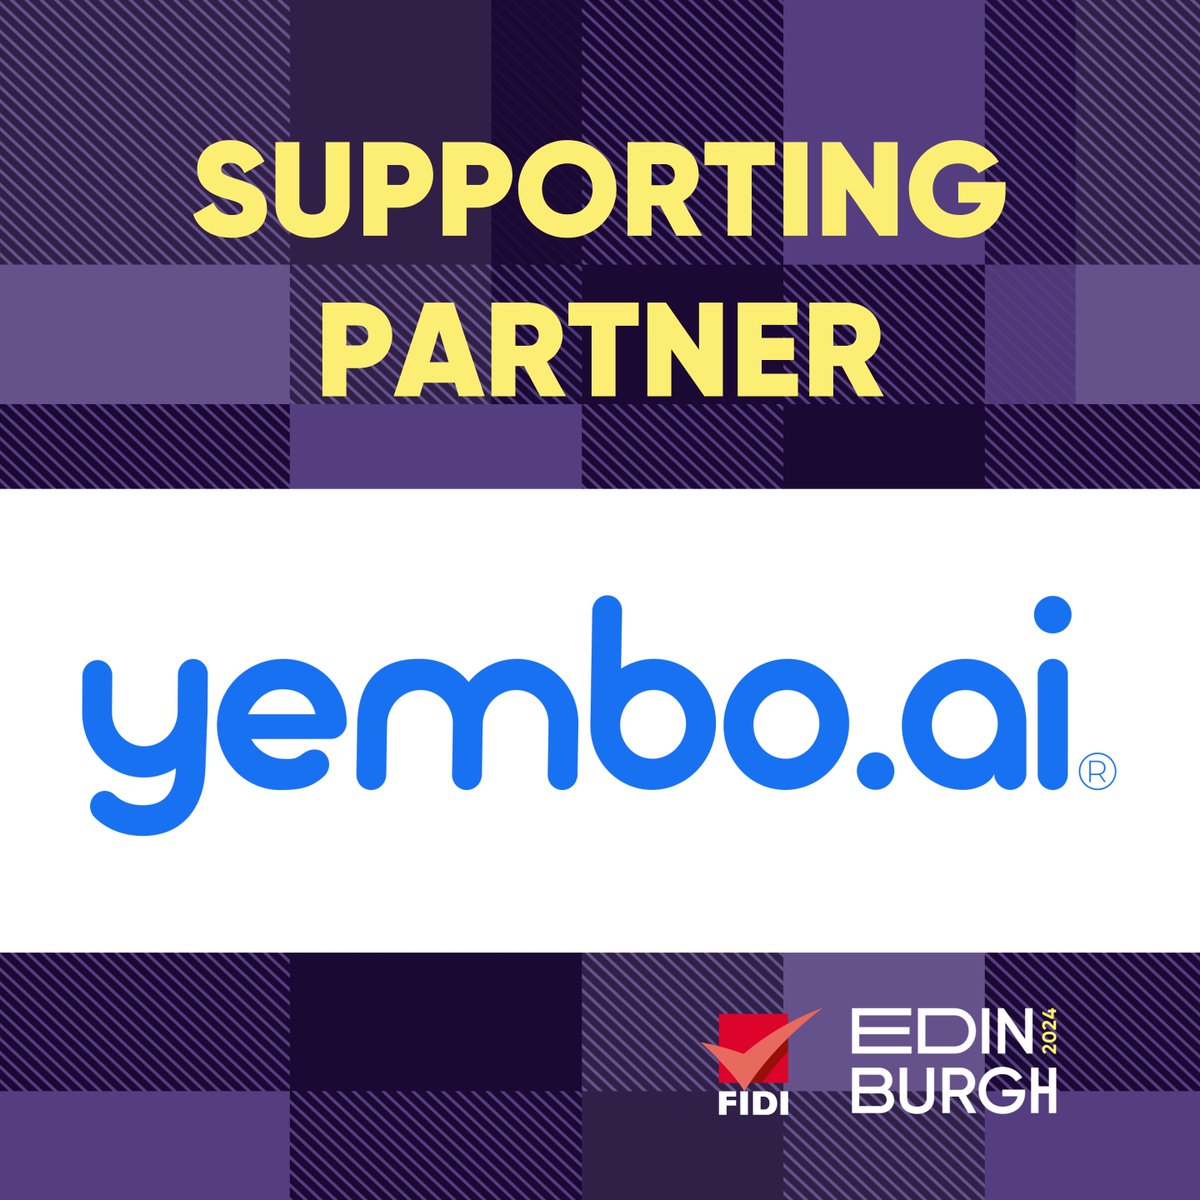 🌍 #2024FIDIconference: Thank you, @yemboai, for being a partner of the 2024 FIDI Conference in Edinburgh! 📱Get the app to connect with attendees, book meetings & view your agenda : 🔶 Googe Play Store ➡ lnkd.in/e86wv6Jv 🔶 Apple App Store ➡ lnkd.in/e7XJ6xun